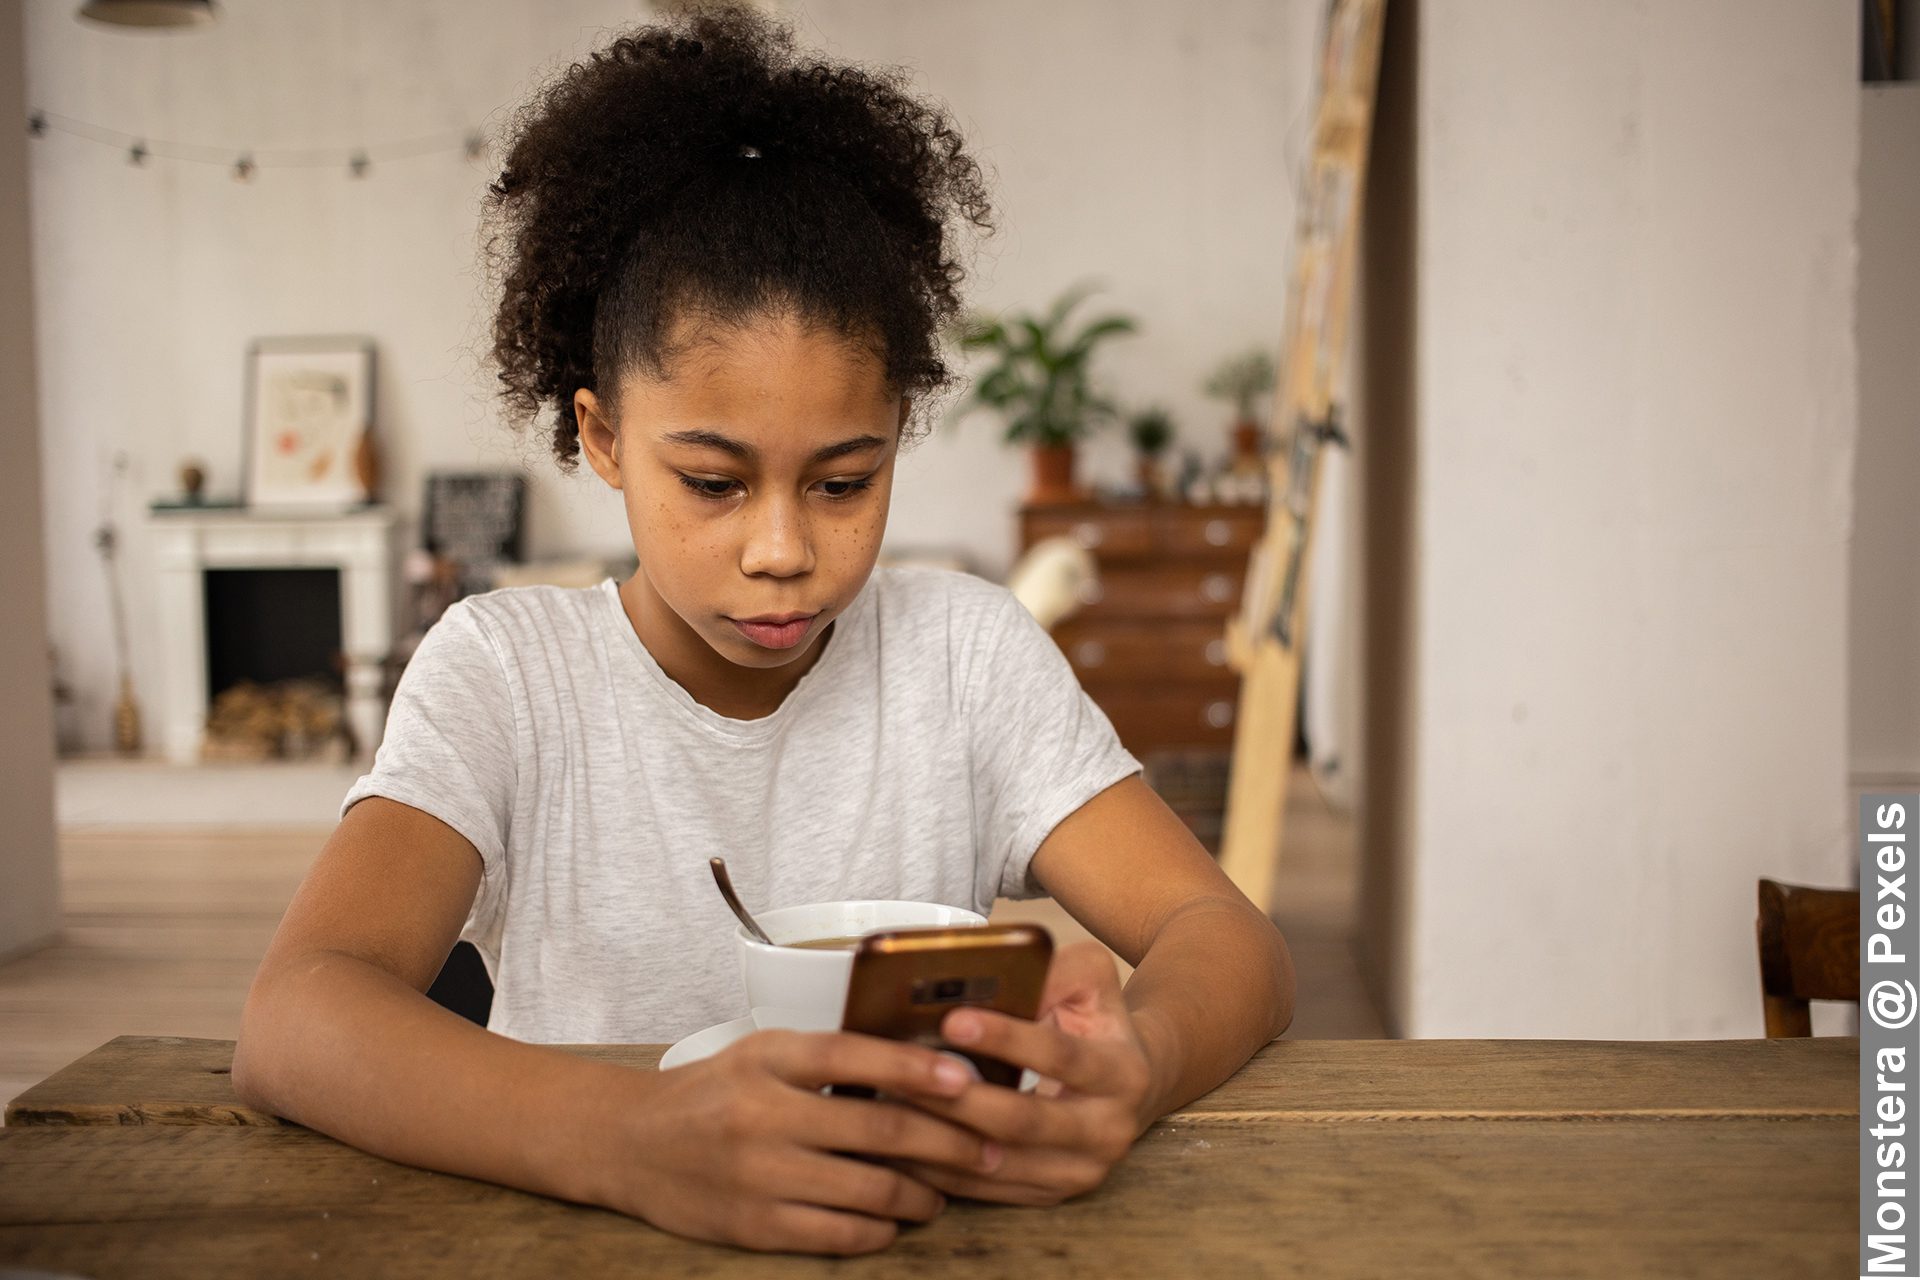 Young black girl surfing Internet on smartphone at table with coffee, need to keep children safe online